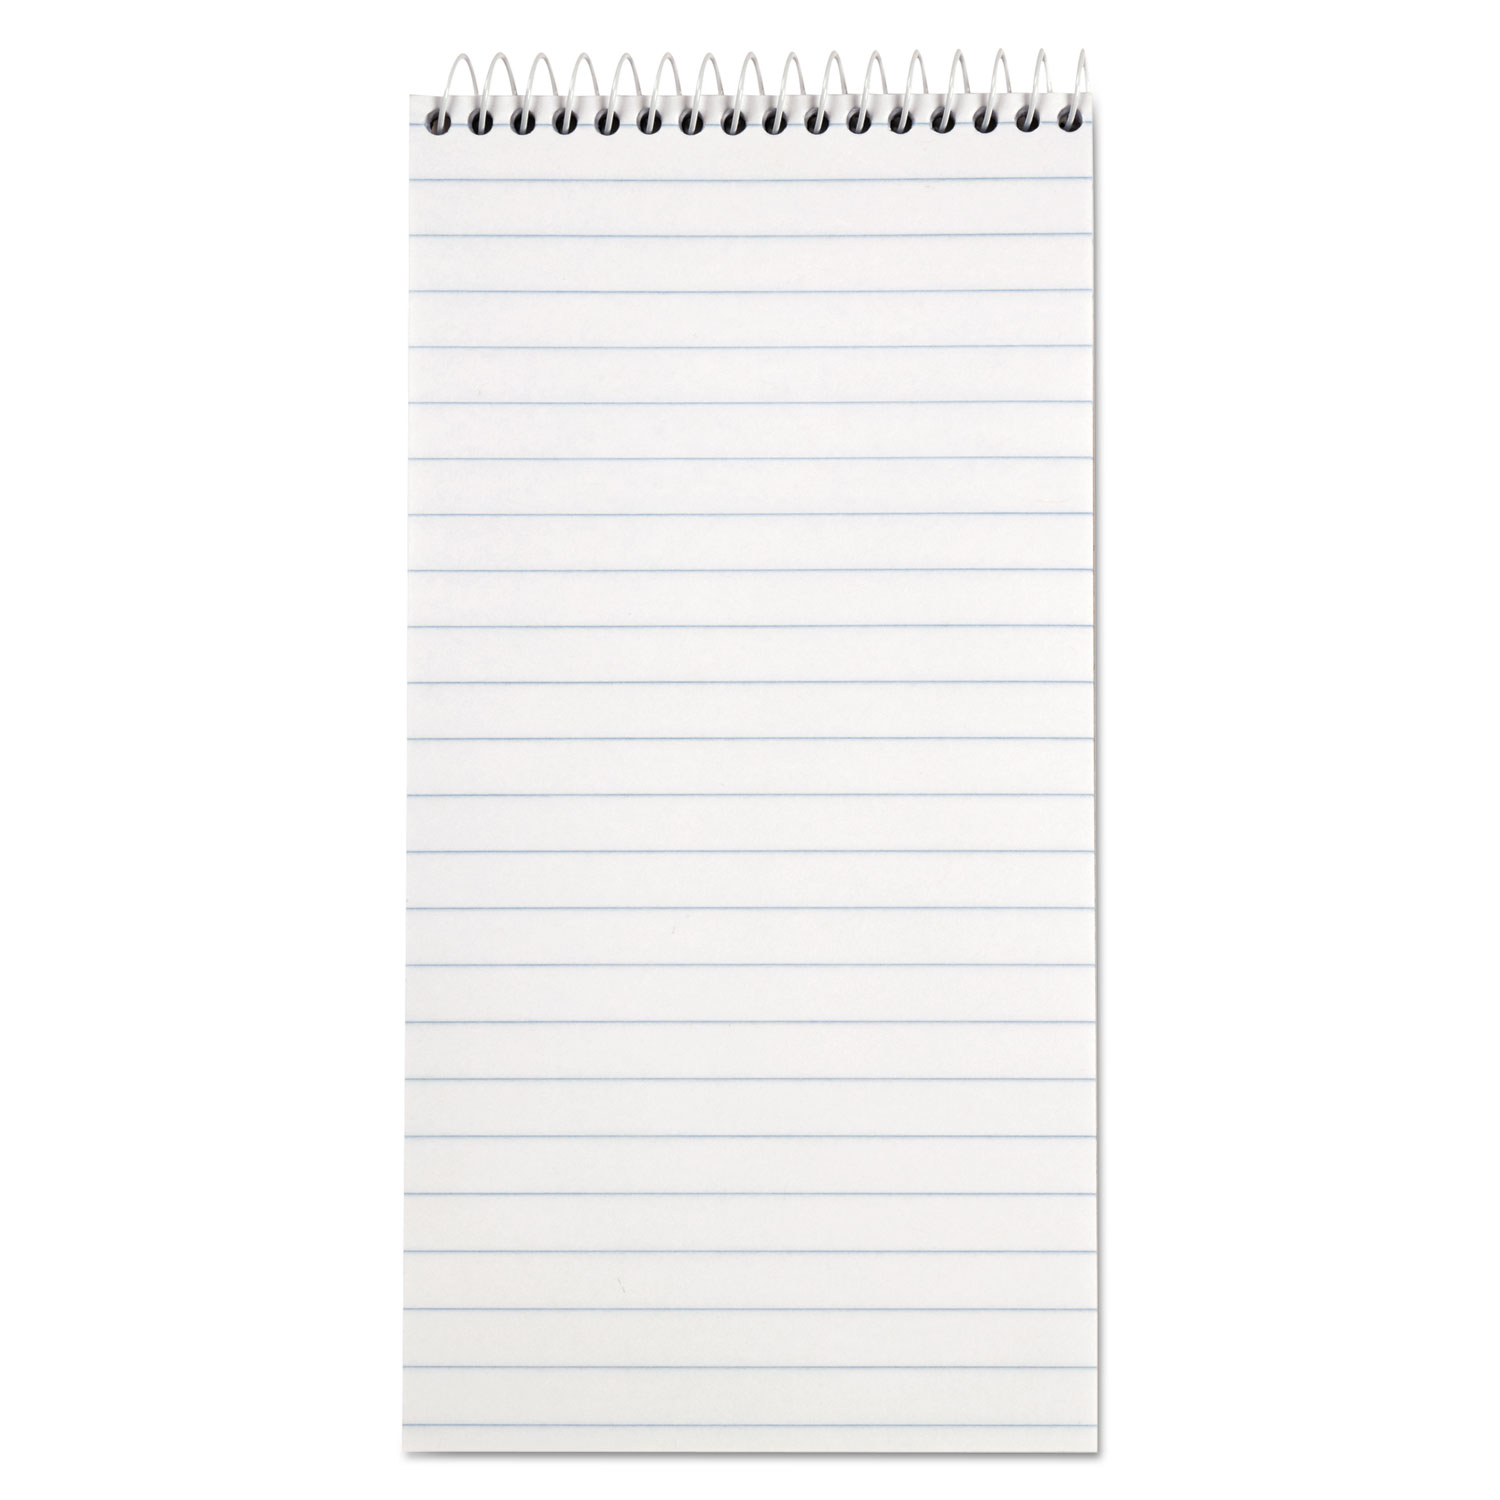  TOPS 8030 Reporter’s Notebook, Wide/Legal Rule, White Cover, 4 x 8, 70 Sheets, 12/Pack (TOP8030) 